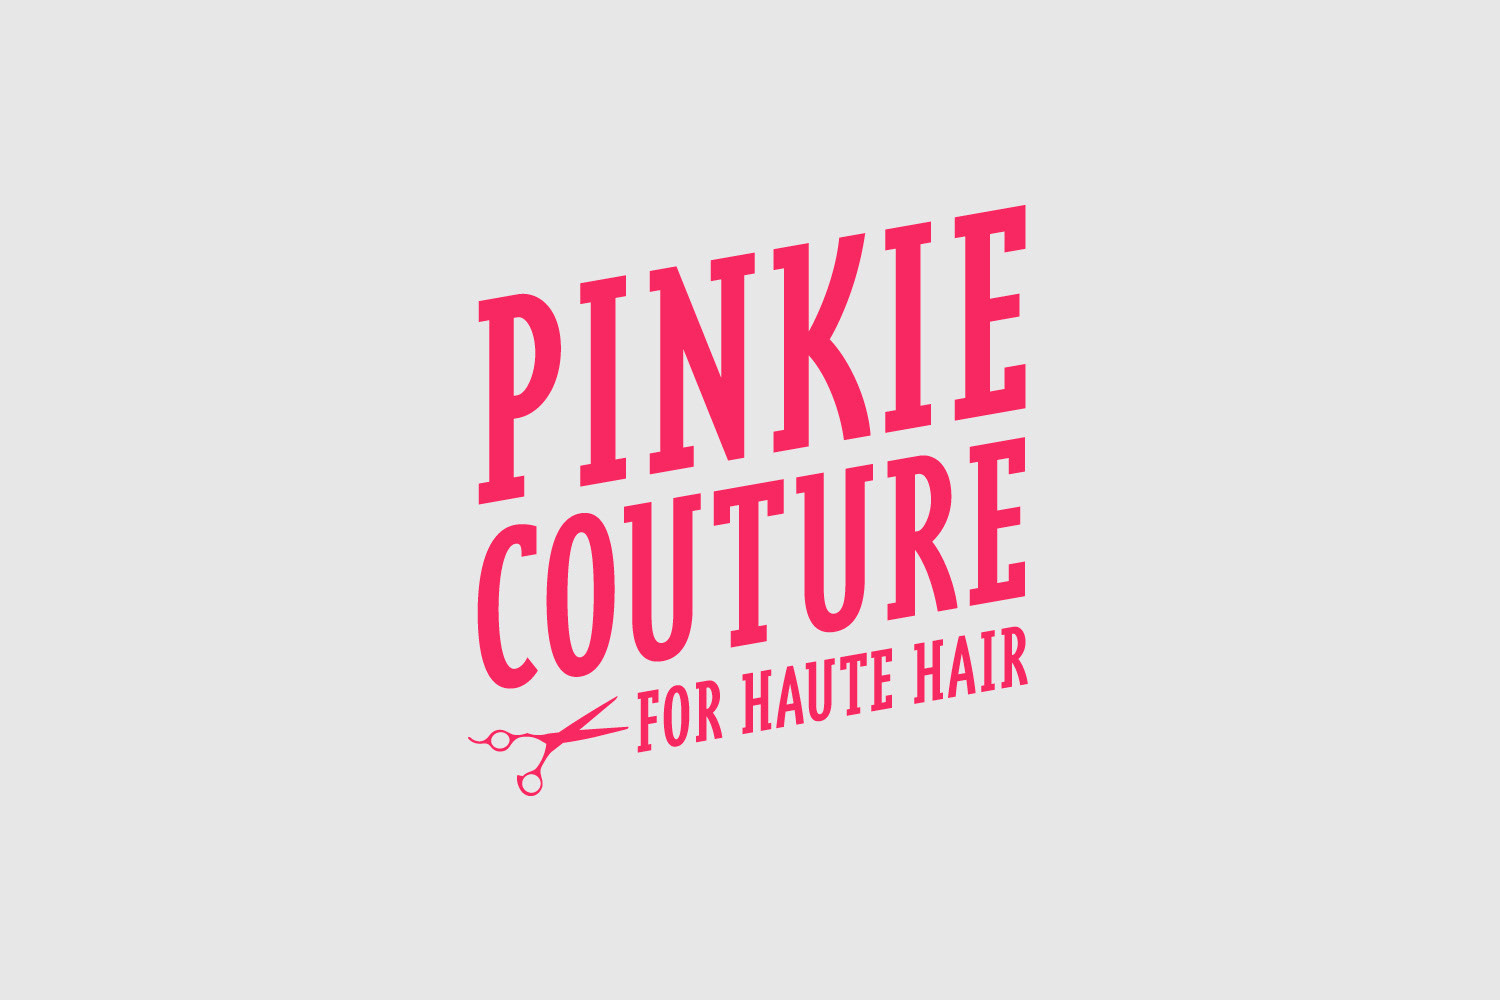 Interwoven Creative - Pinkie Couture for Haute Hair